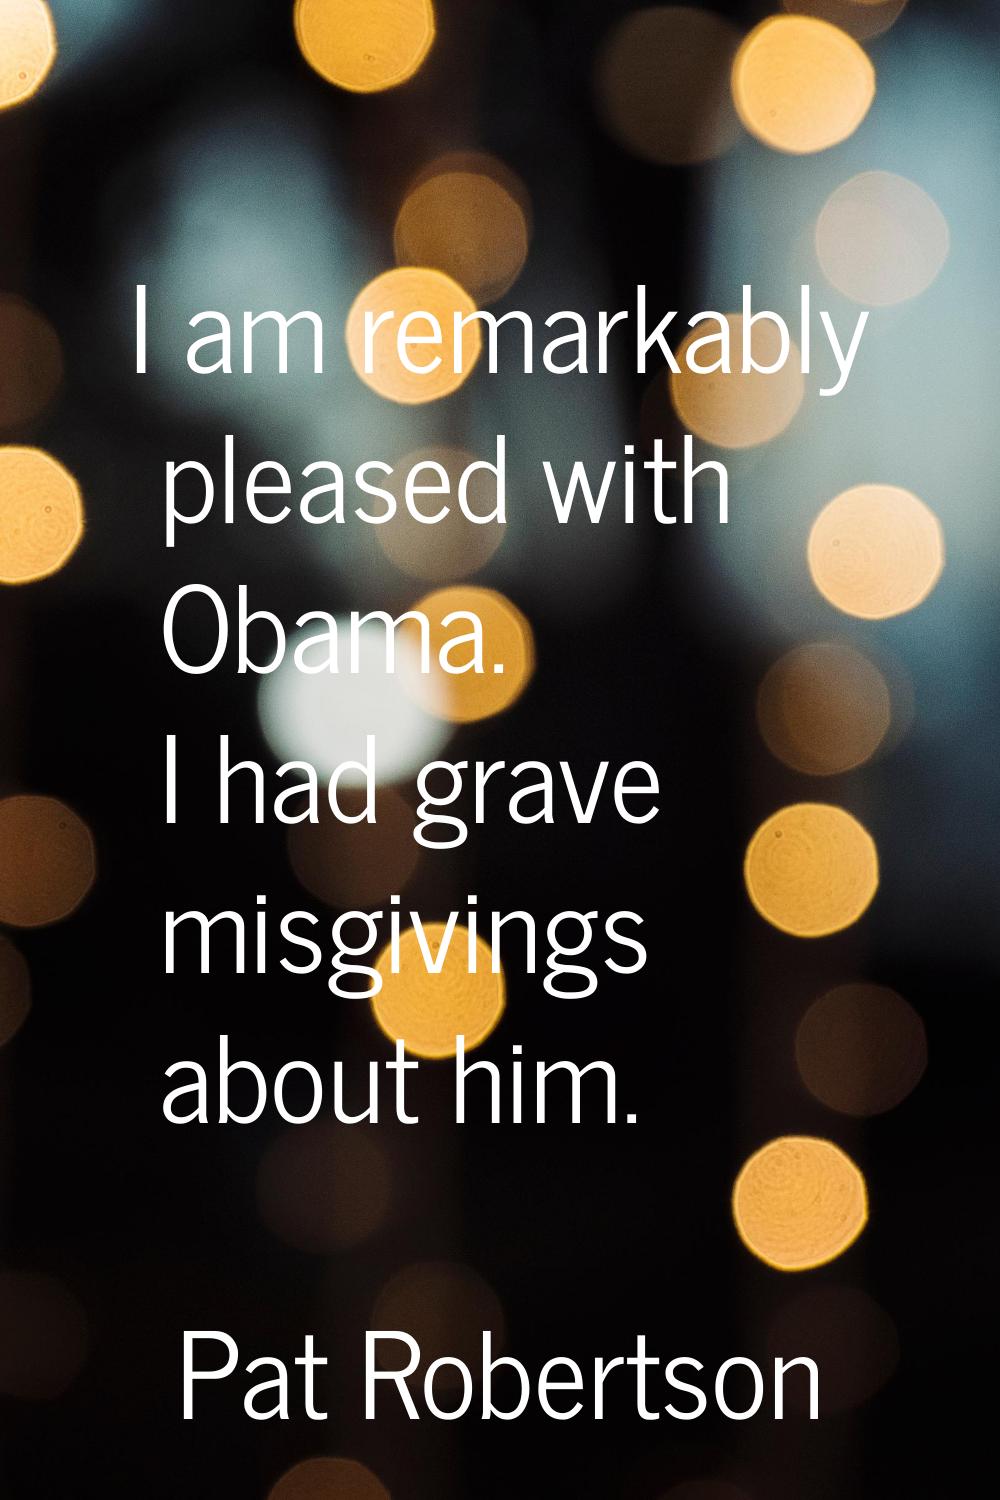 I am remarkably pleased with Obama. I had grave misgivings about him.